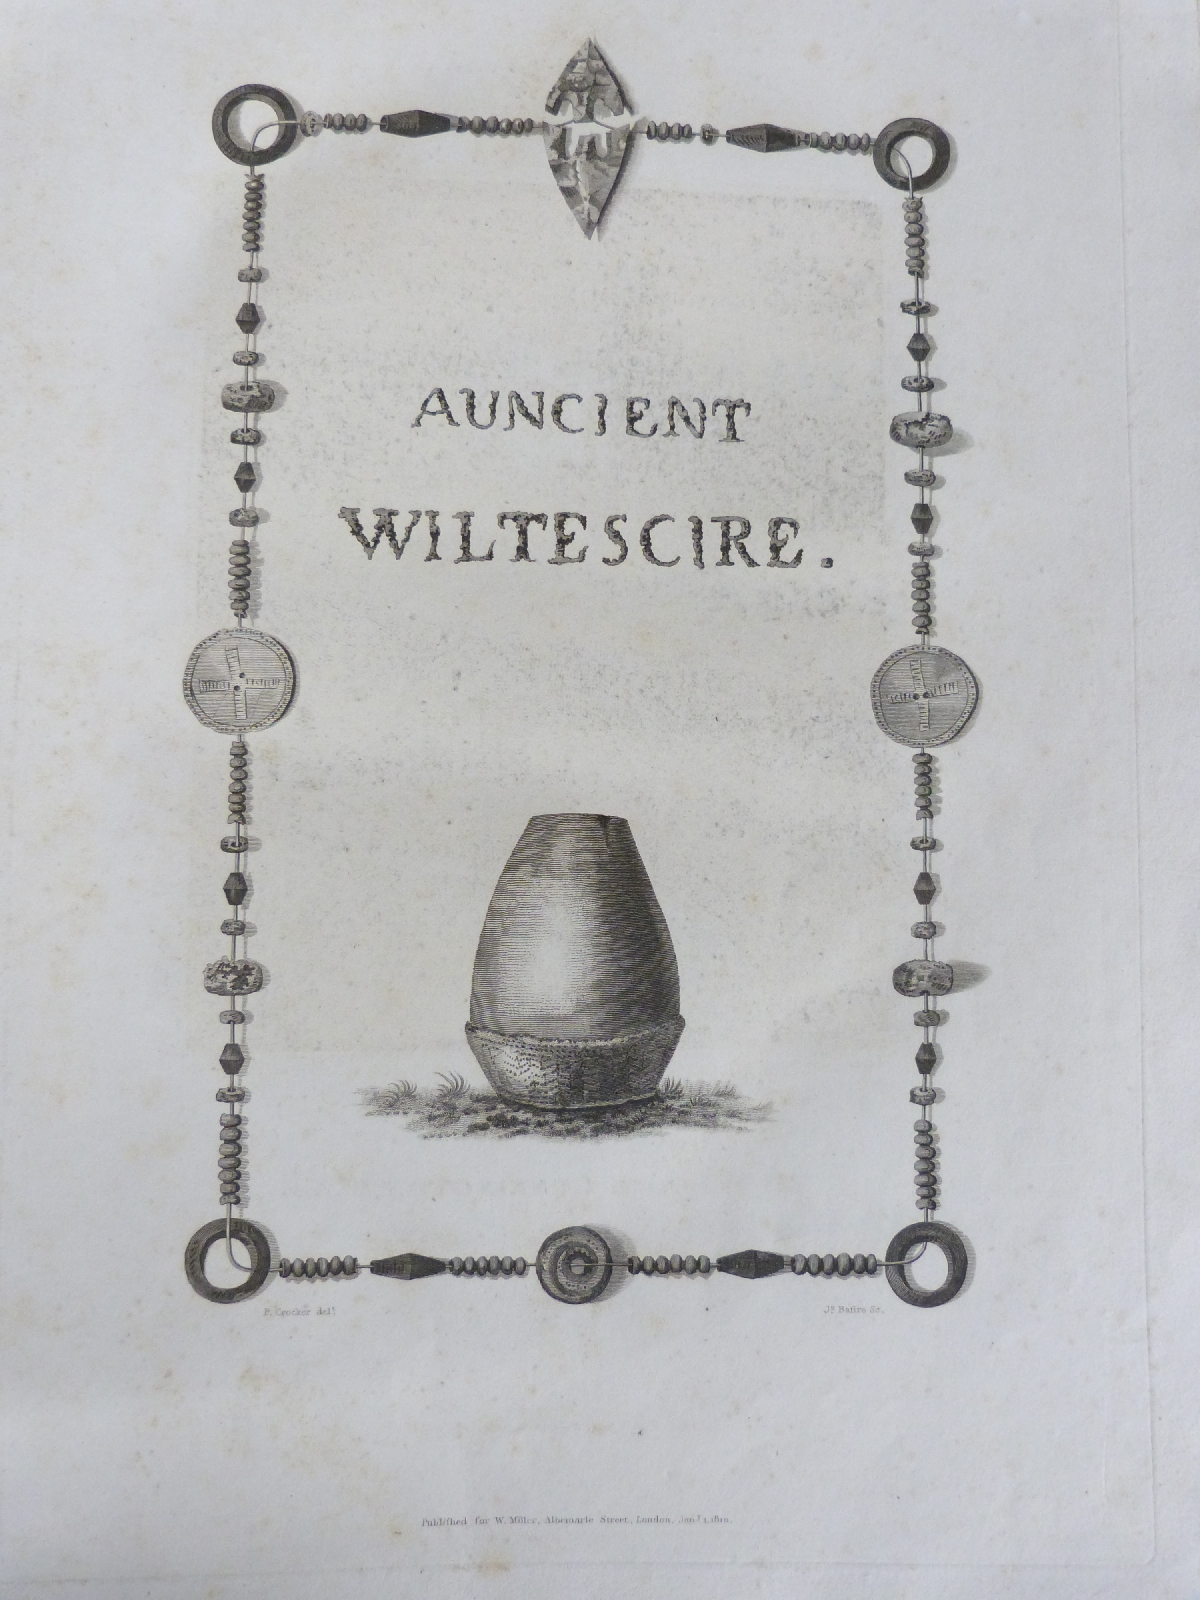 The Ancient History of South Wiltshire by Sir Richard Colt Hoare, Bart published William Miller 1812 - Image 2 of 5